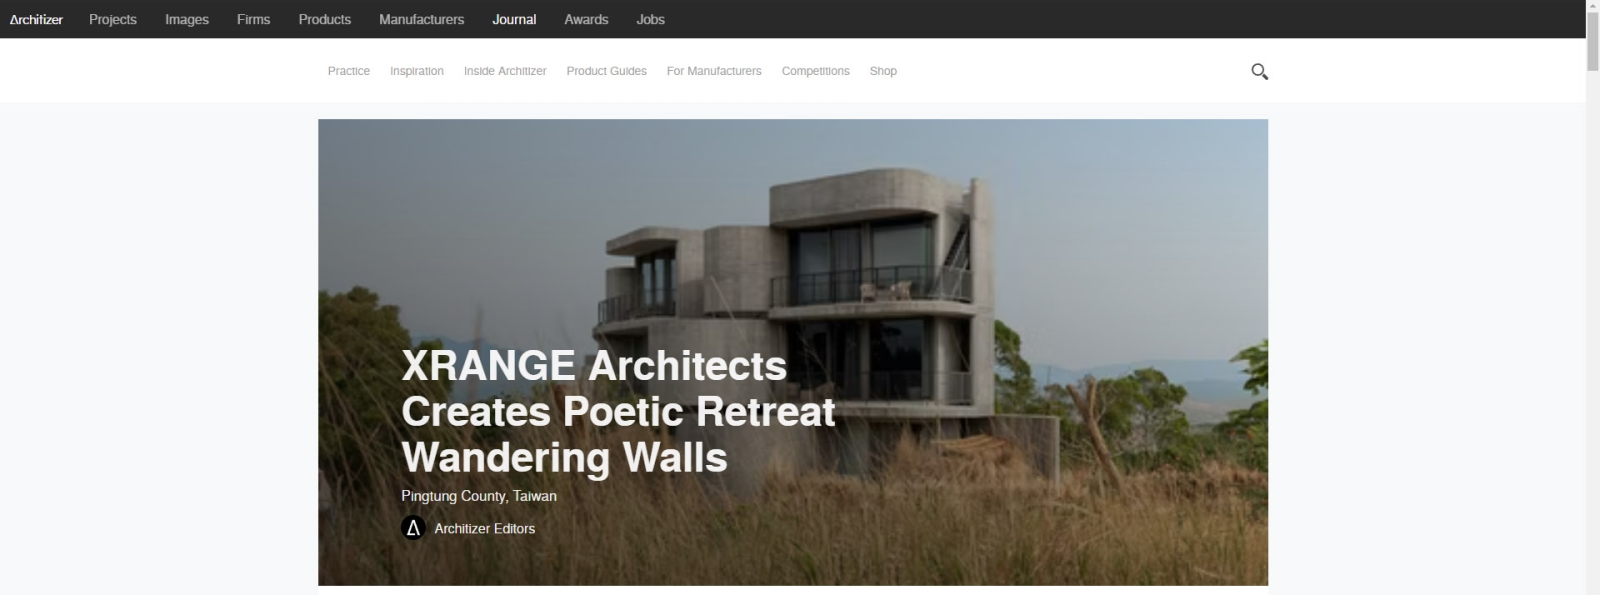 Architizer reported the Wandering Walls